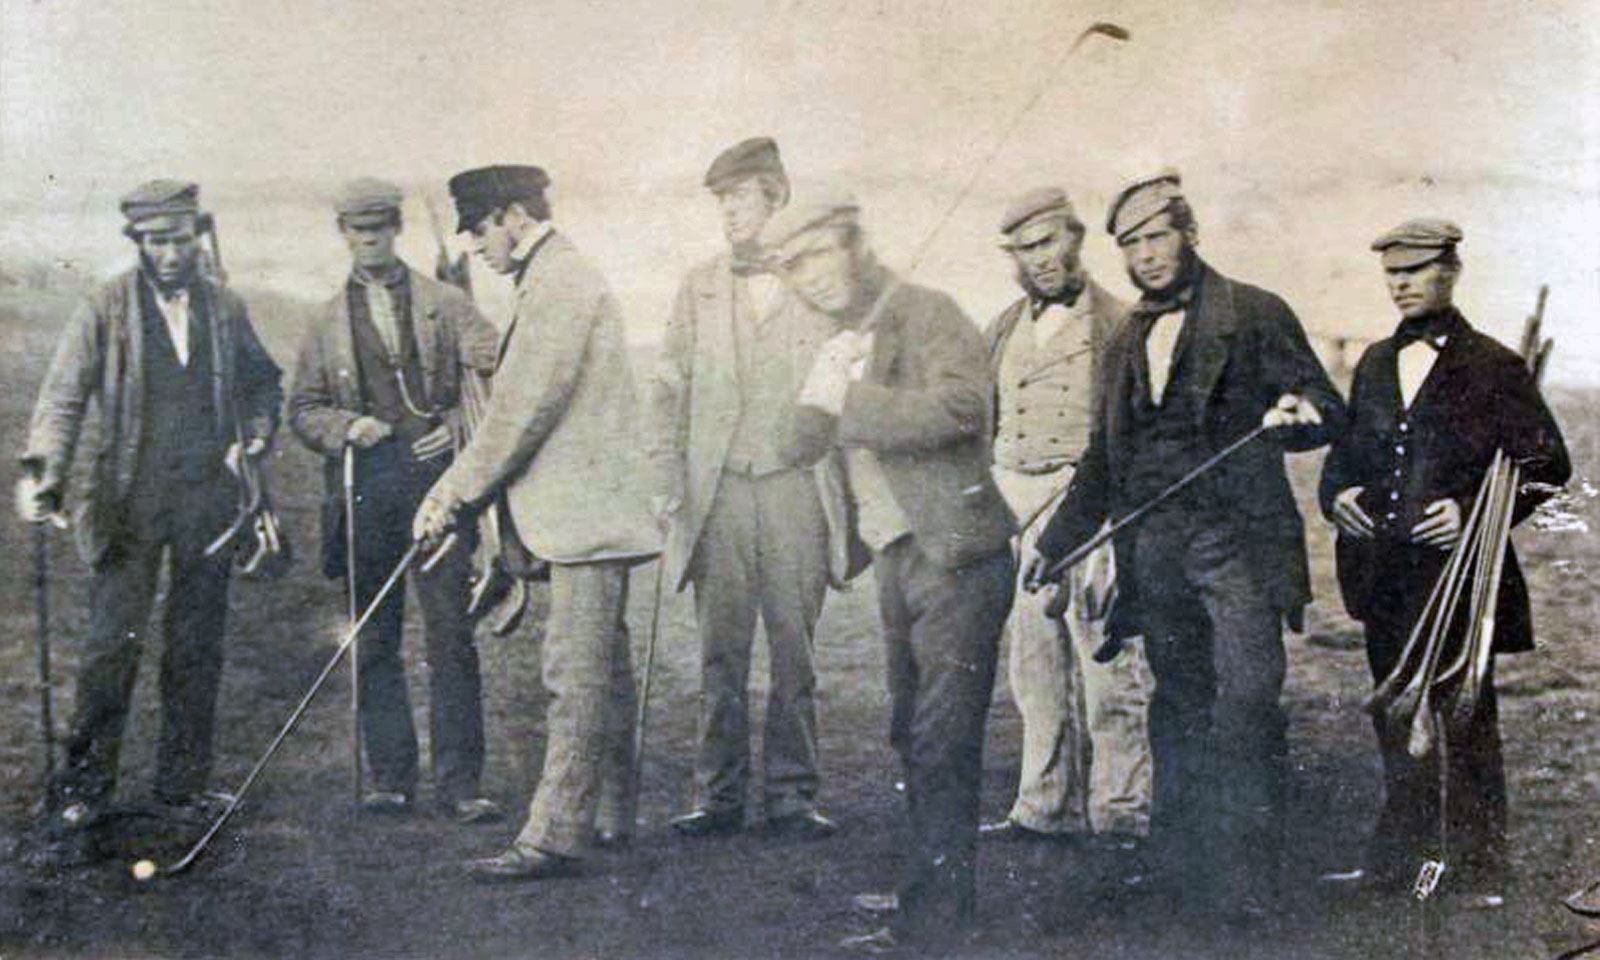 Allan-Robertson-and-Old-Tom-Morris-Pioneers-of-Golf-and-The-Open-Championship